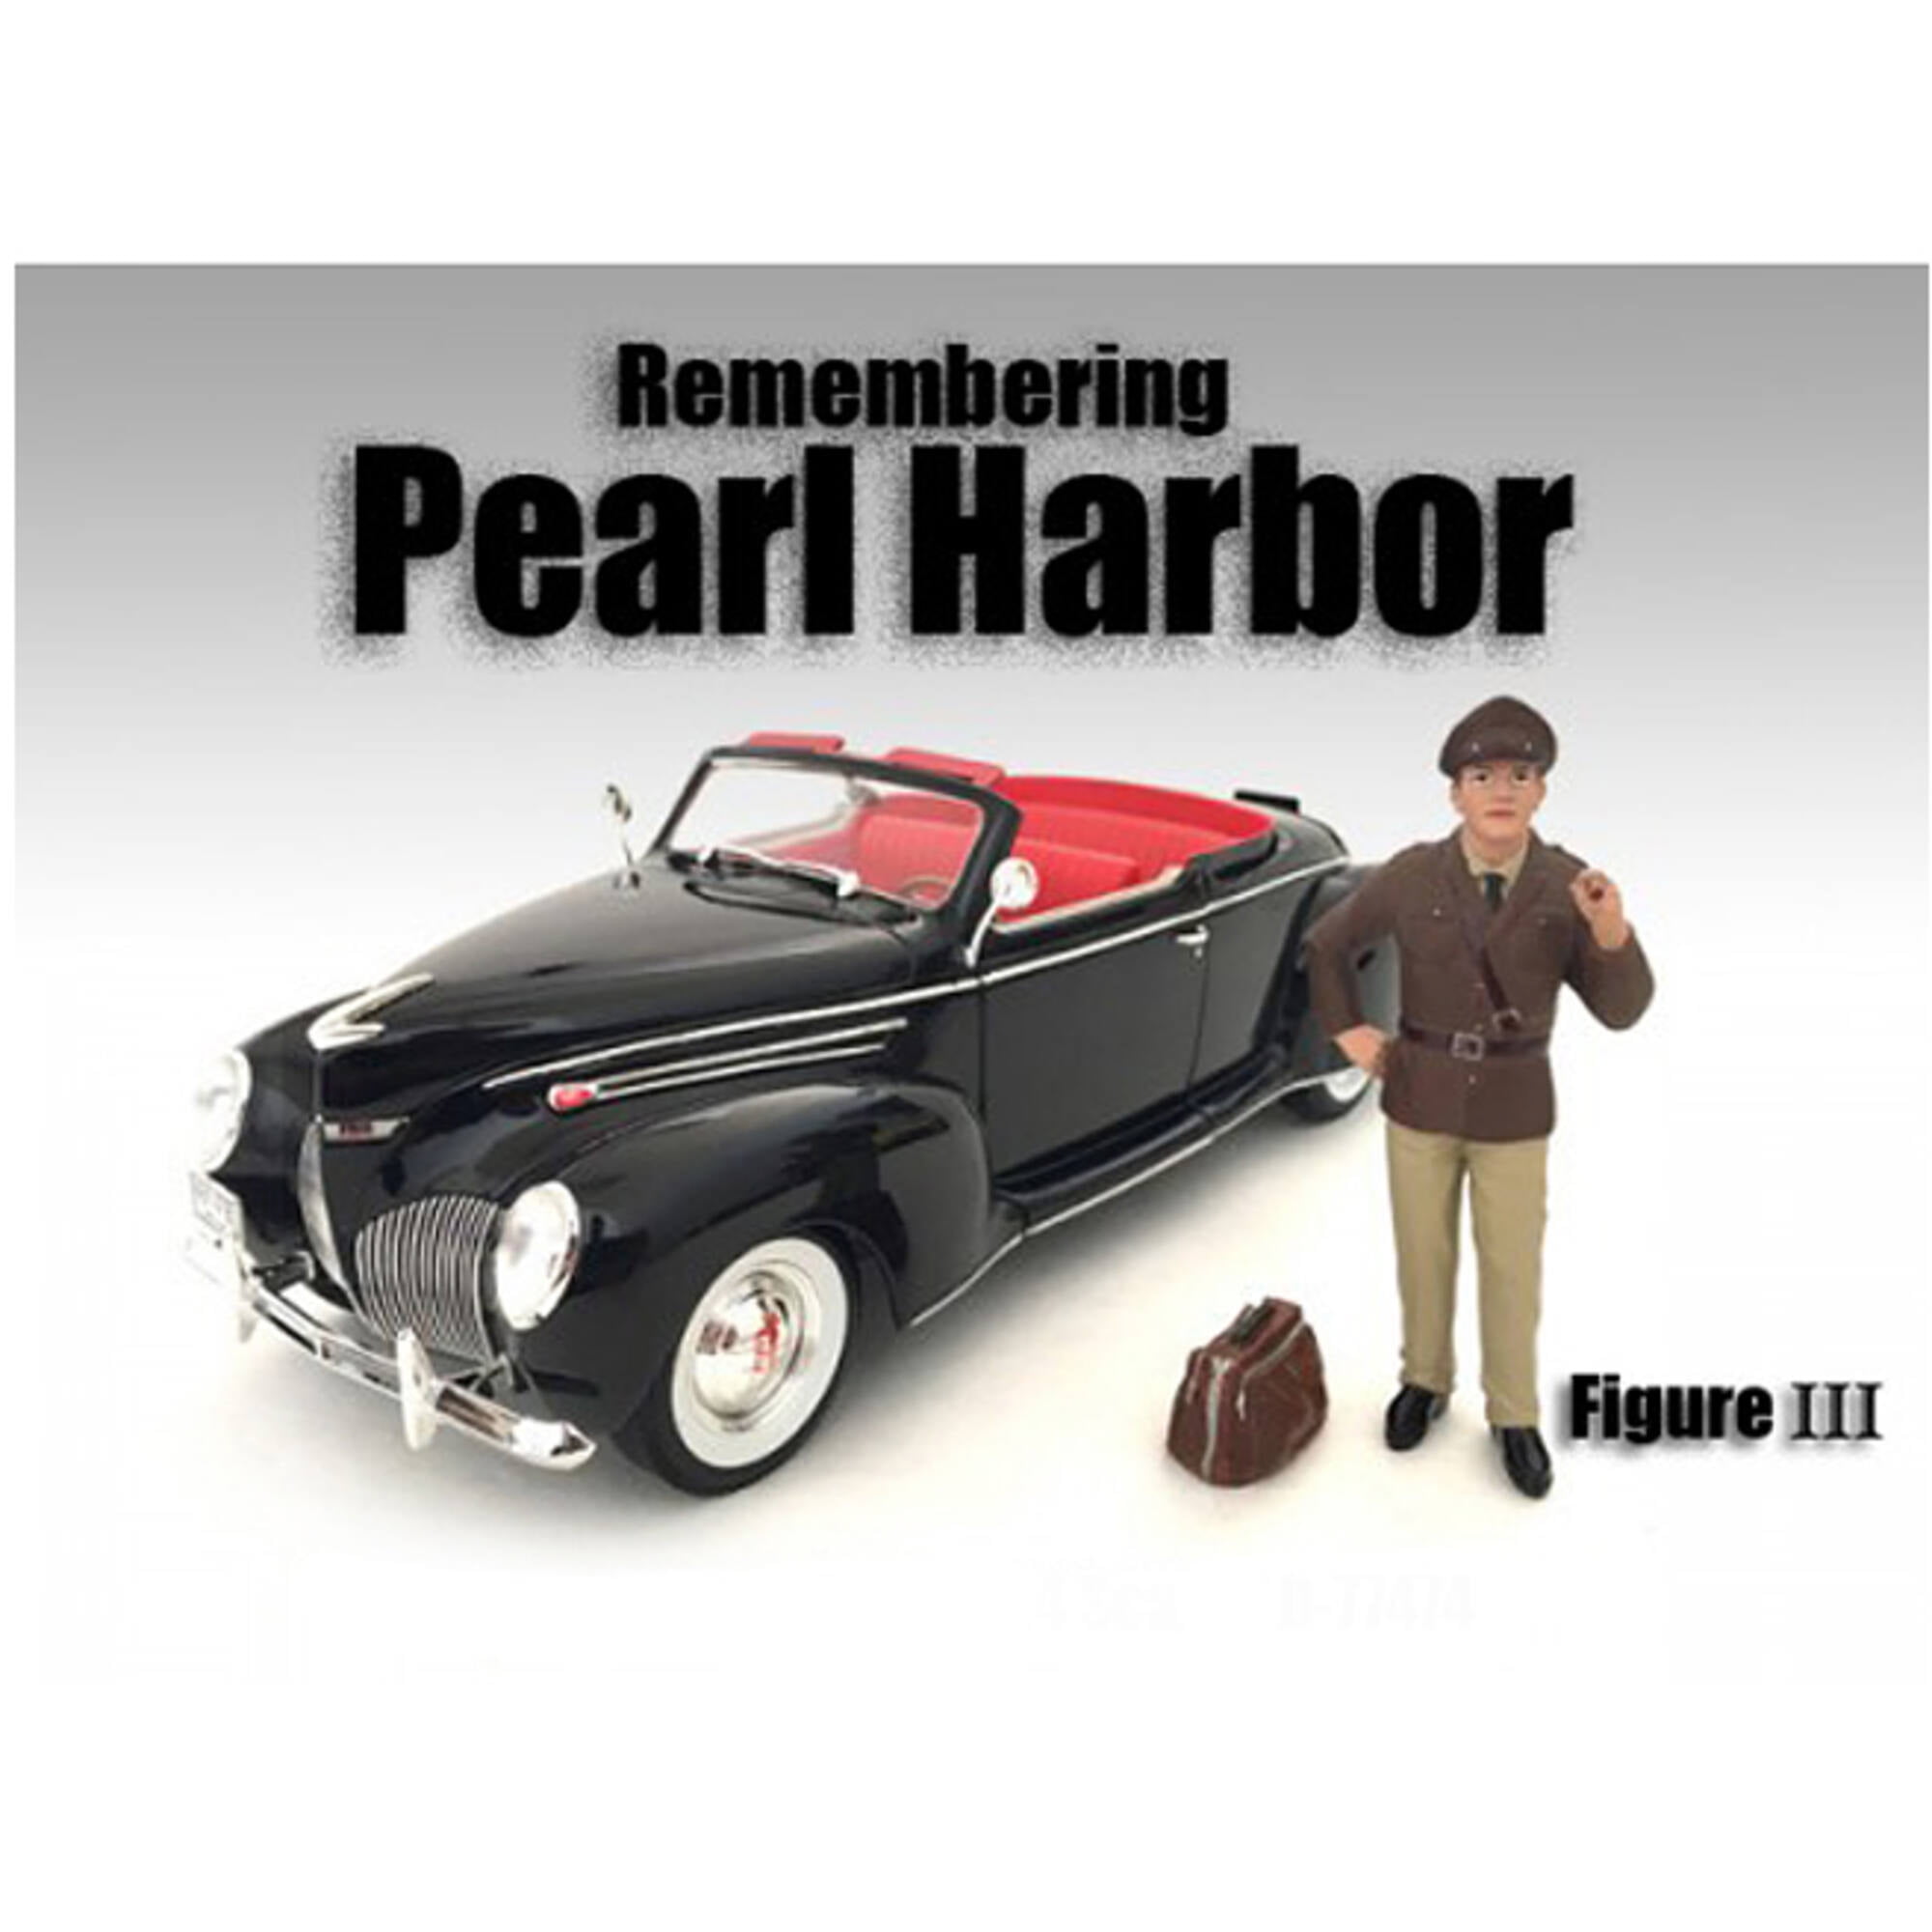 77474 1 By 24 Scale Remembering Pearl Harbor Figure Iii